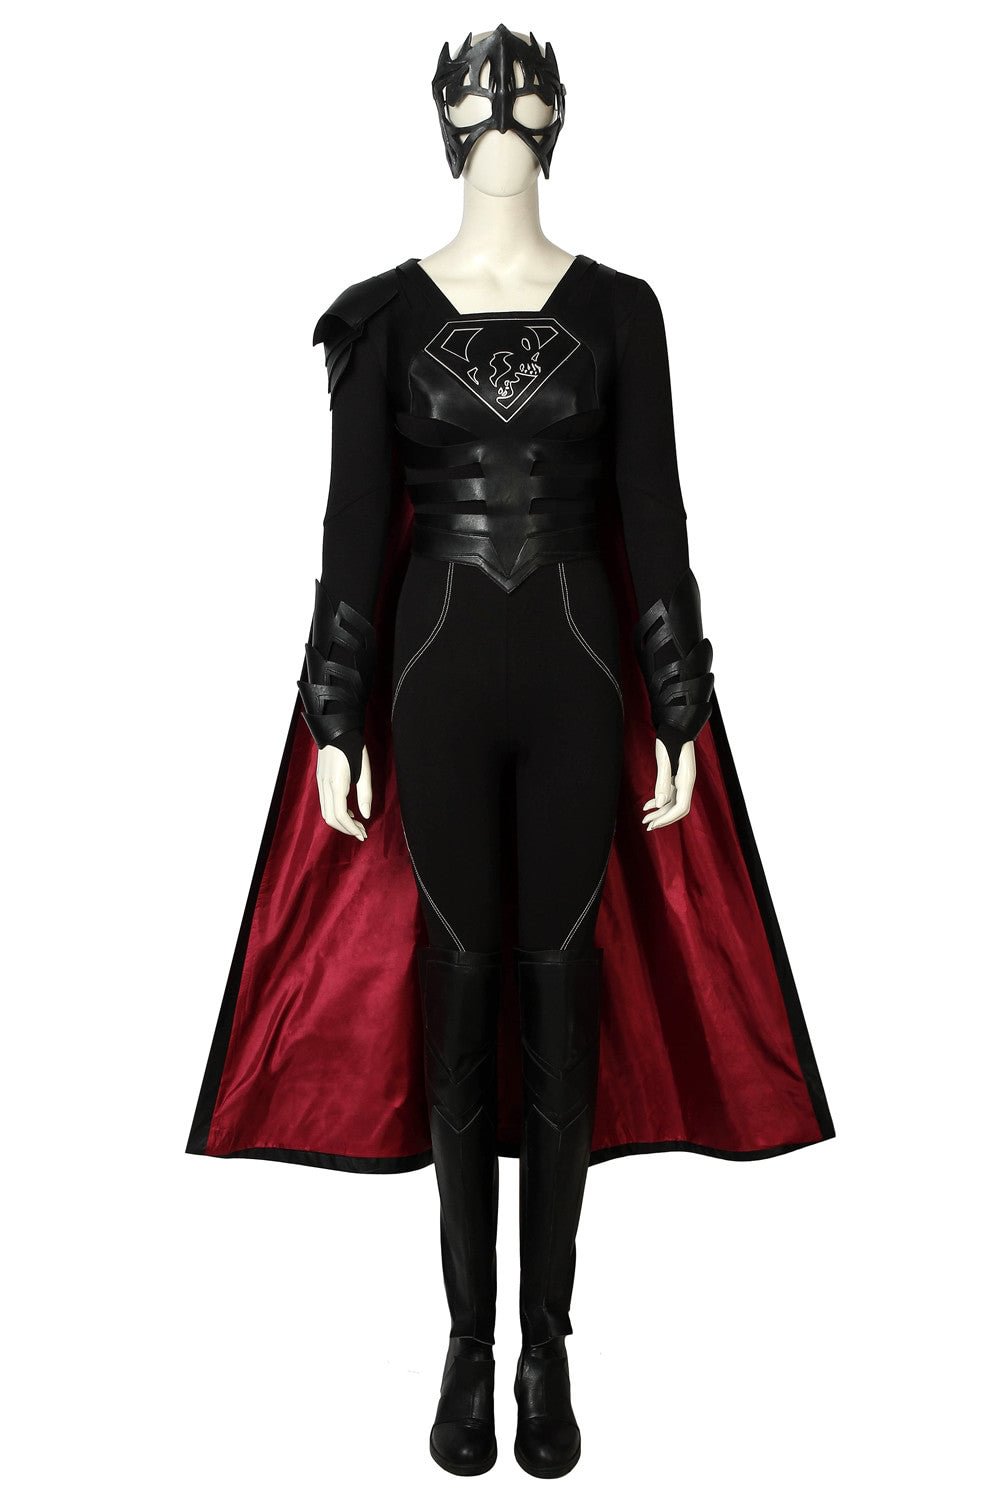 Supergirl Season 3 Costume Reign Samantha Arias Cosplay Outfit